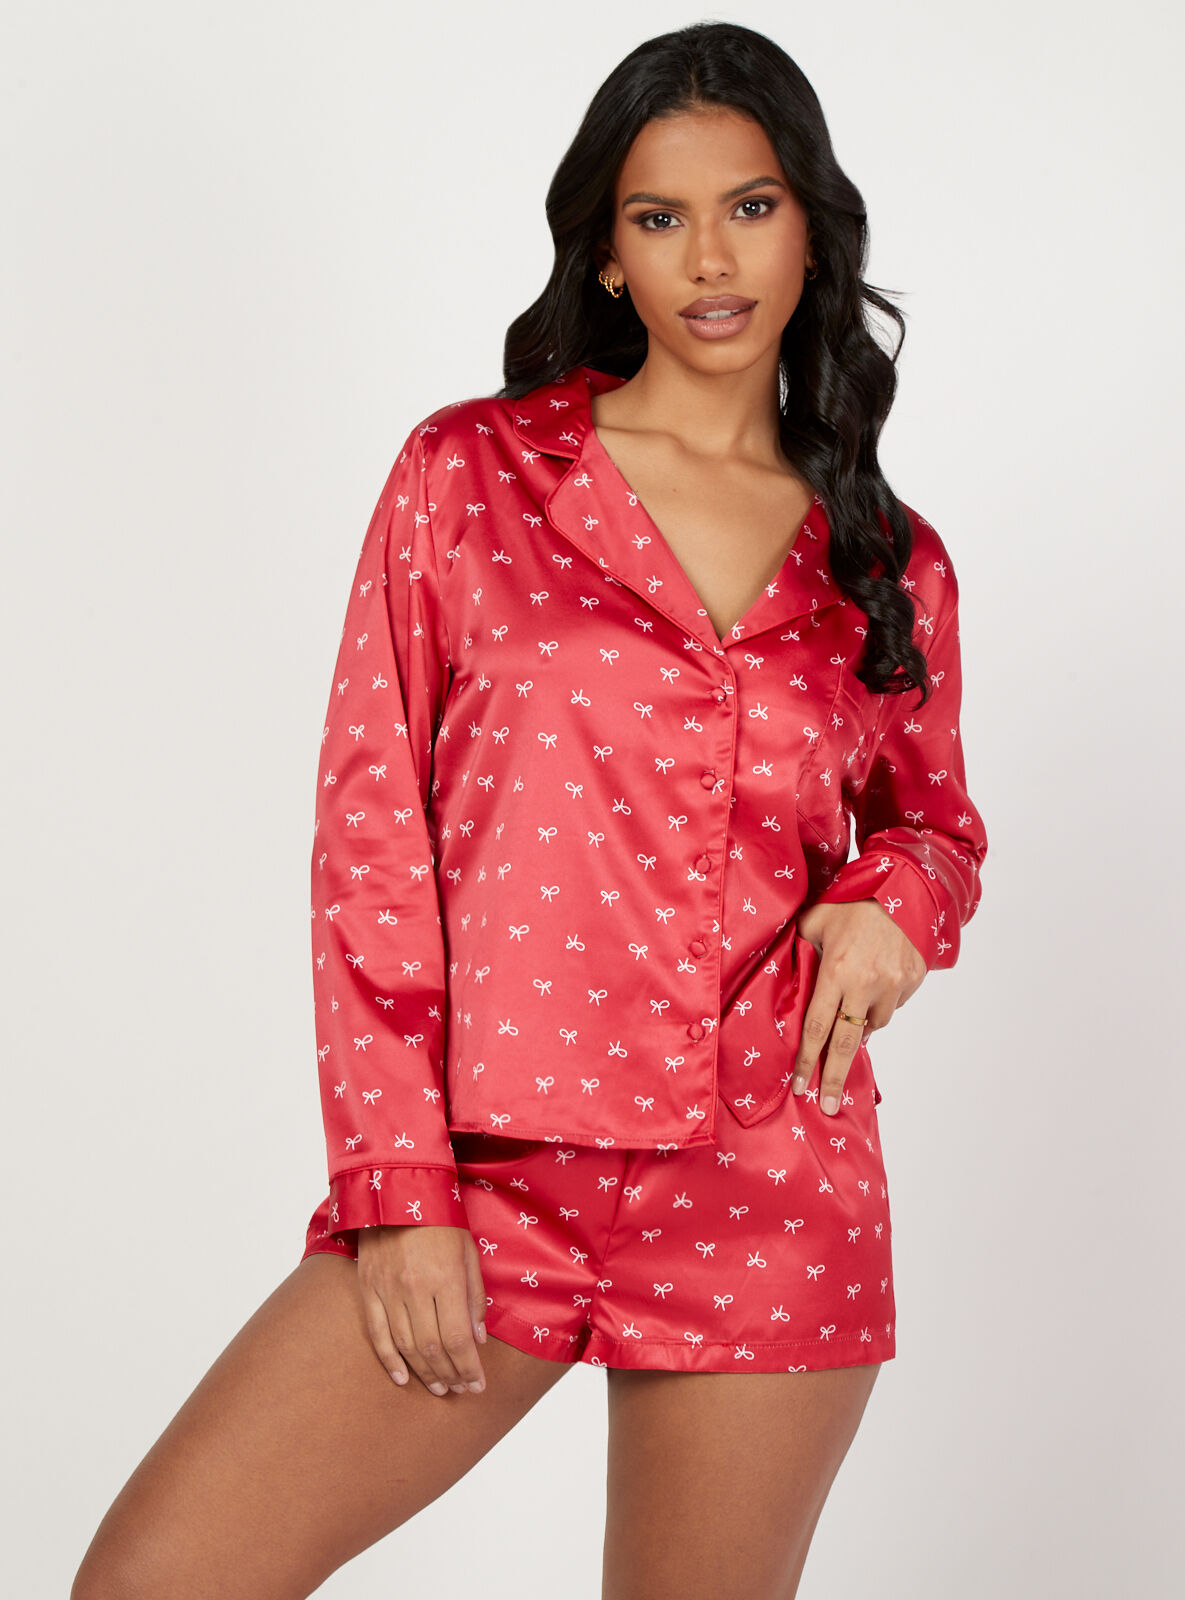 Boux Avenue Bow print satin revere and shorts set - Red Mix - 10